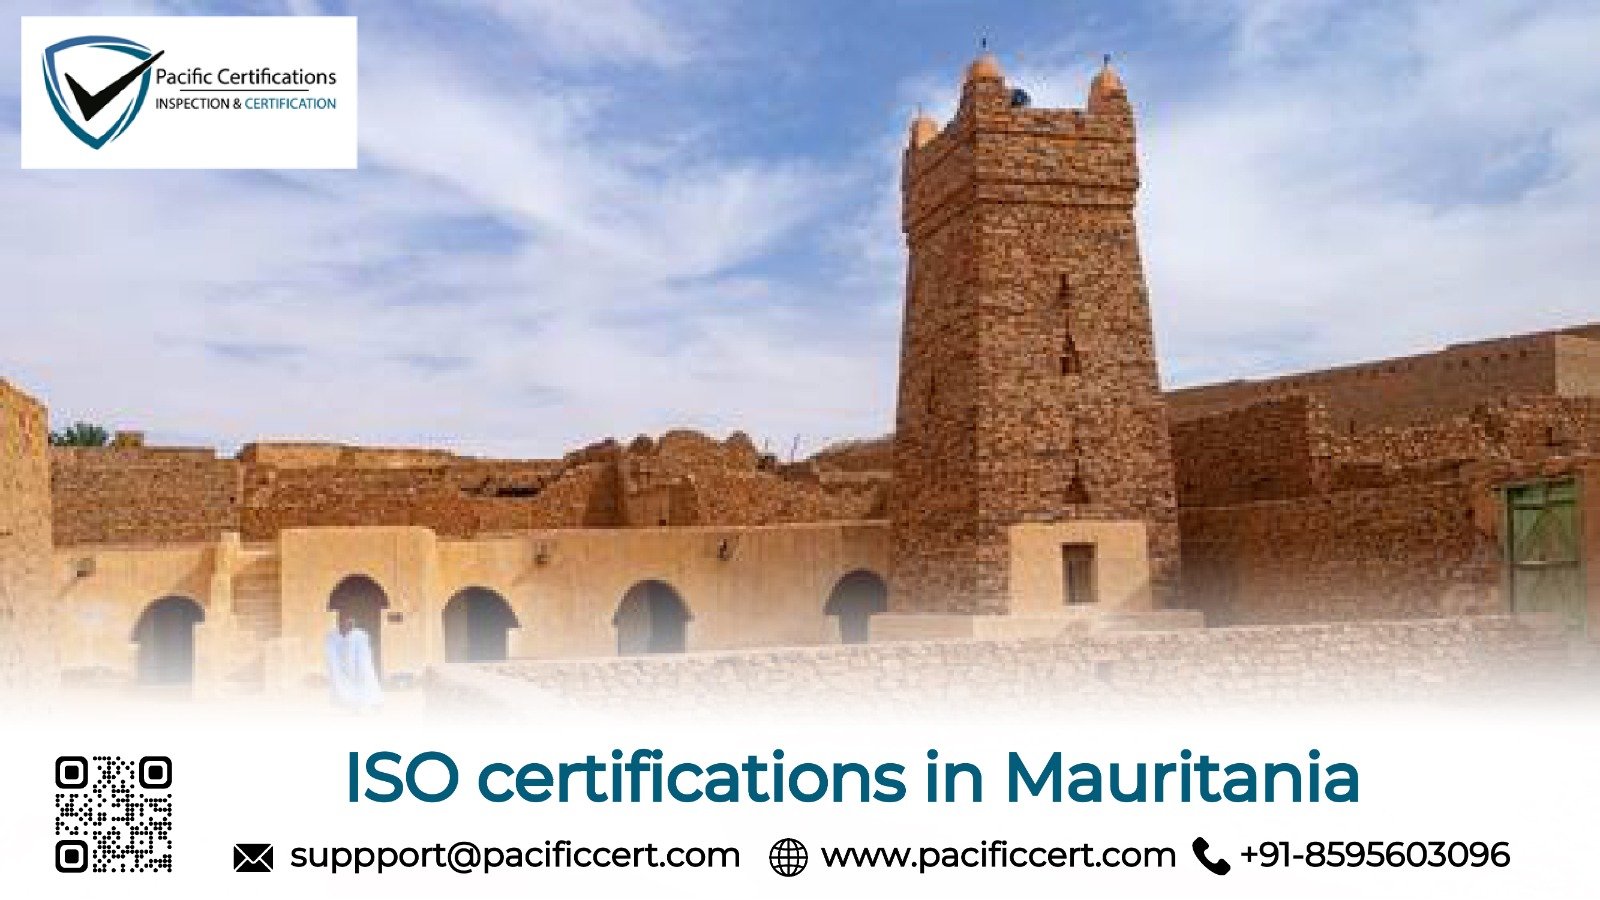 ISO Certifications in Mauritania and How Pacific Certifications can help | Pacific Certifications